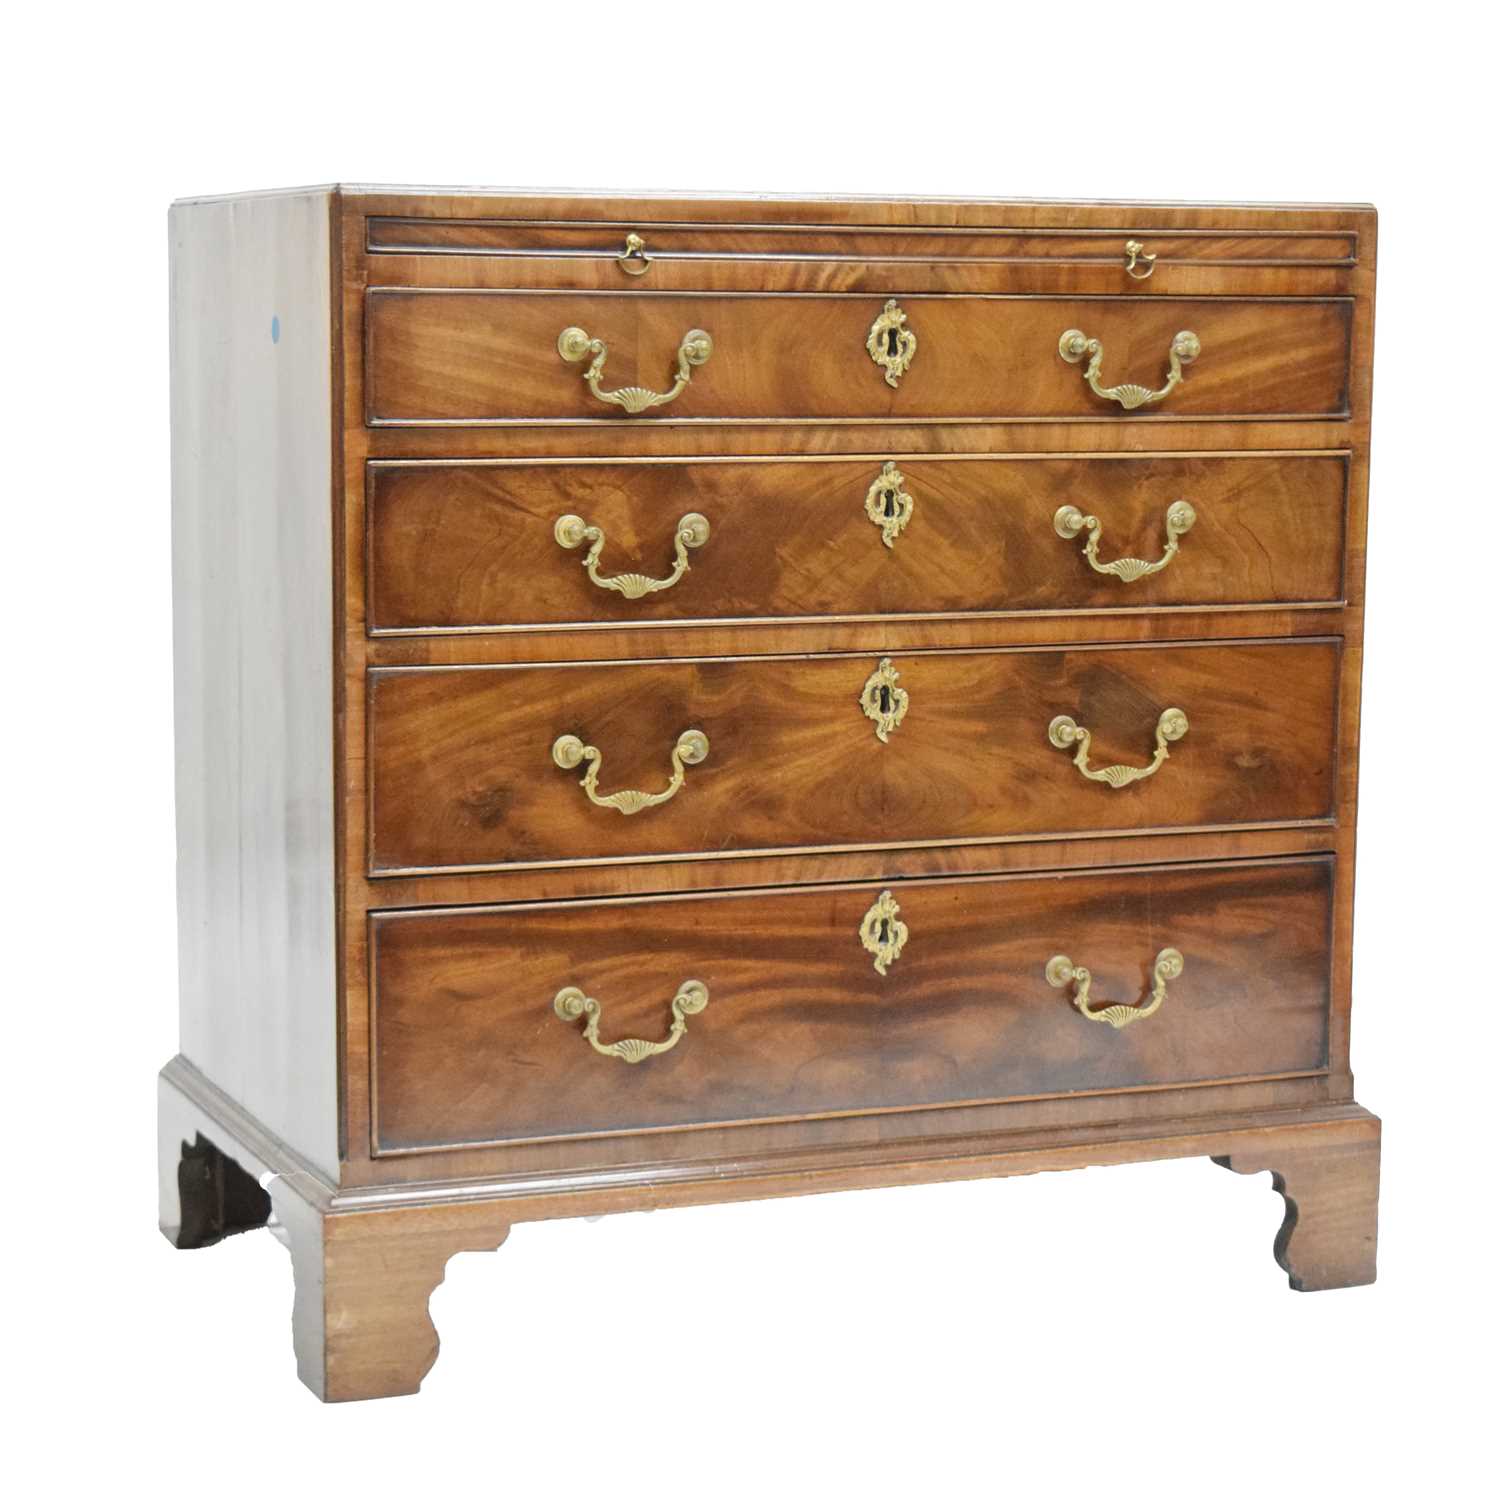 Mahogany four-drawer chest - Image 2 of 11